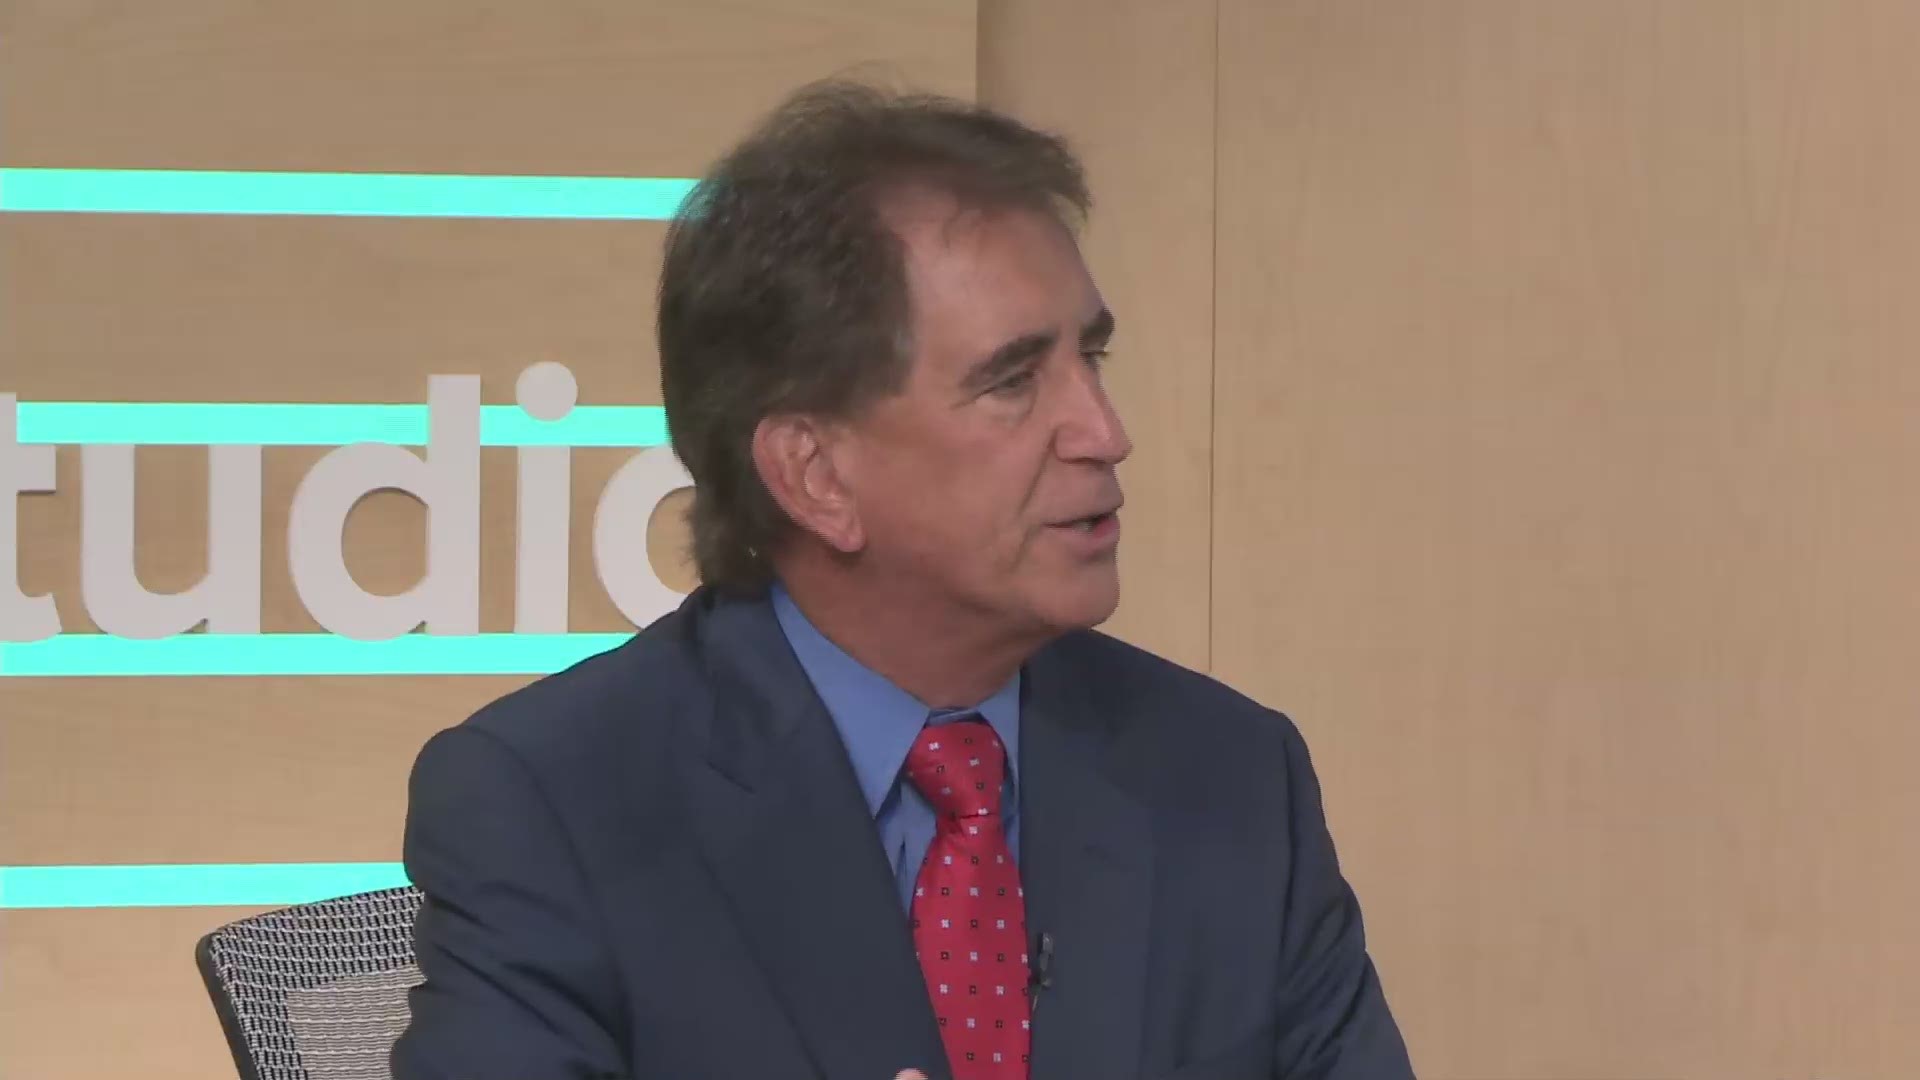 The 62-year-old Renacci has thrown his hat in the ring and will run for Governor of Ohio.